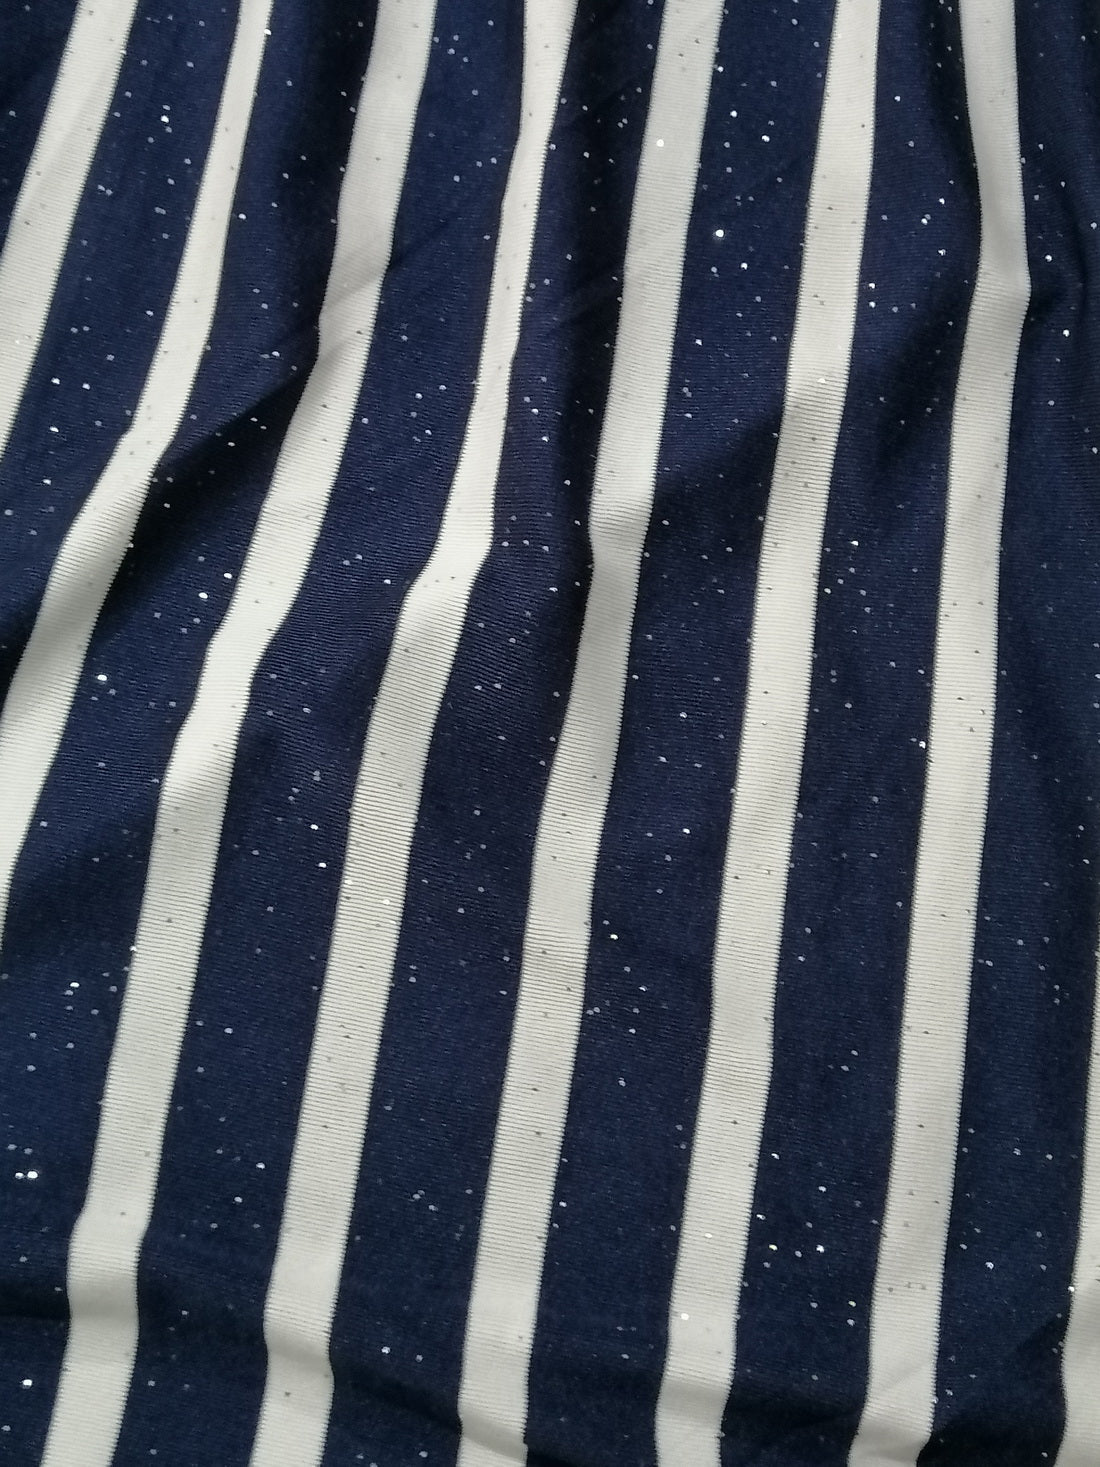 Polyester lycra knitted striped fabric with shimmer navy and white